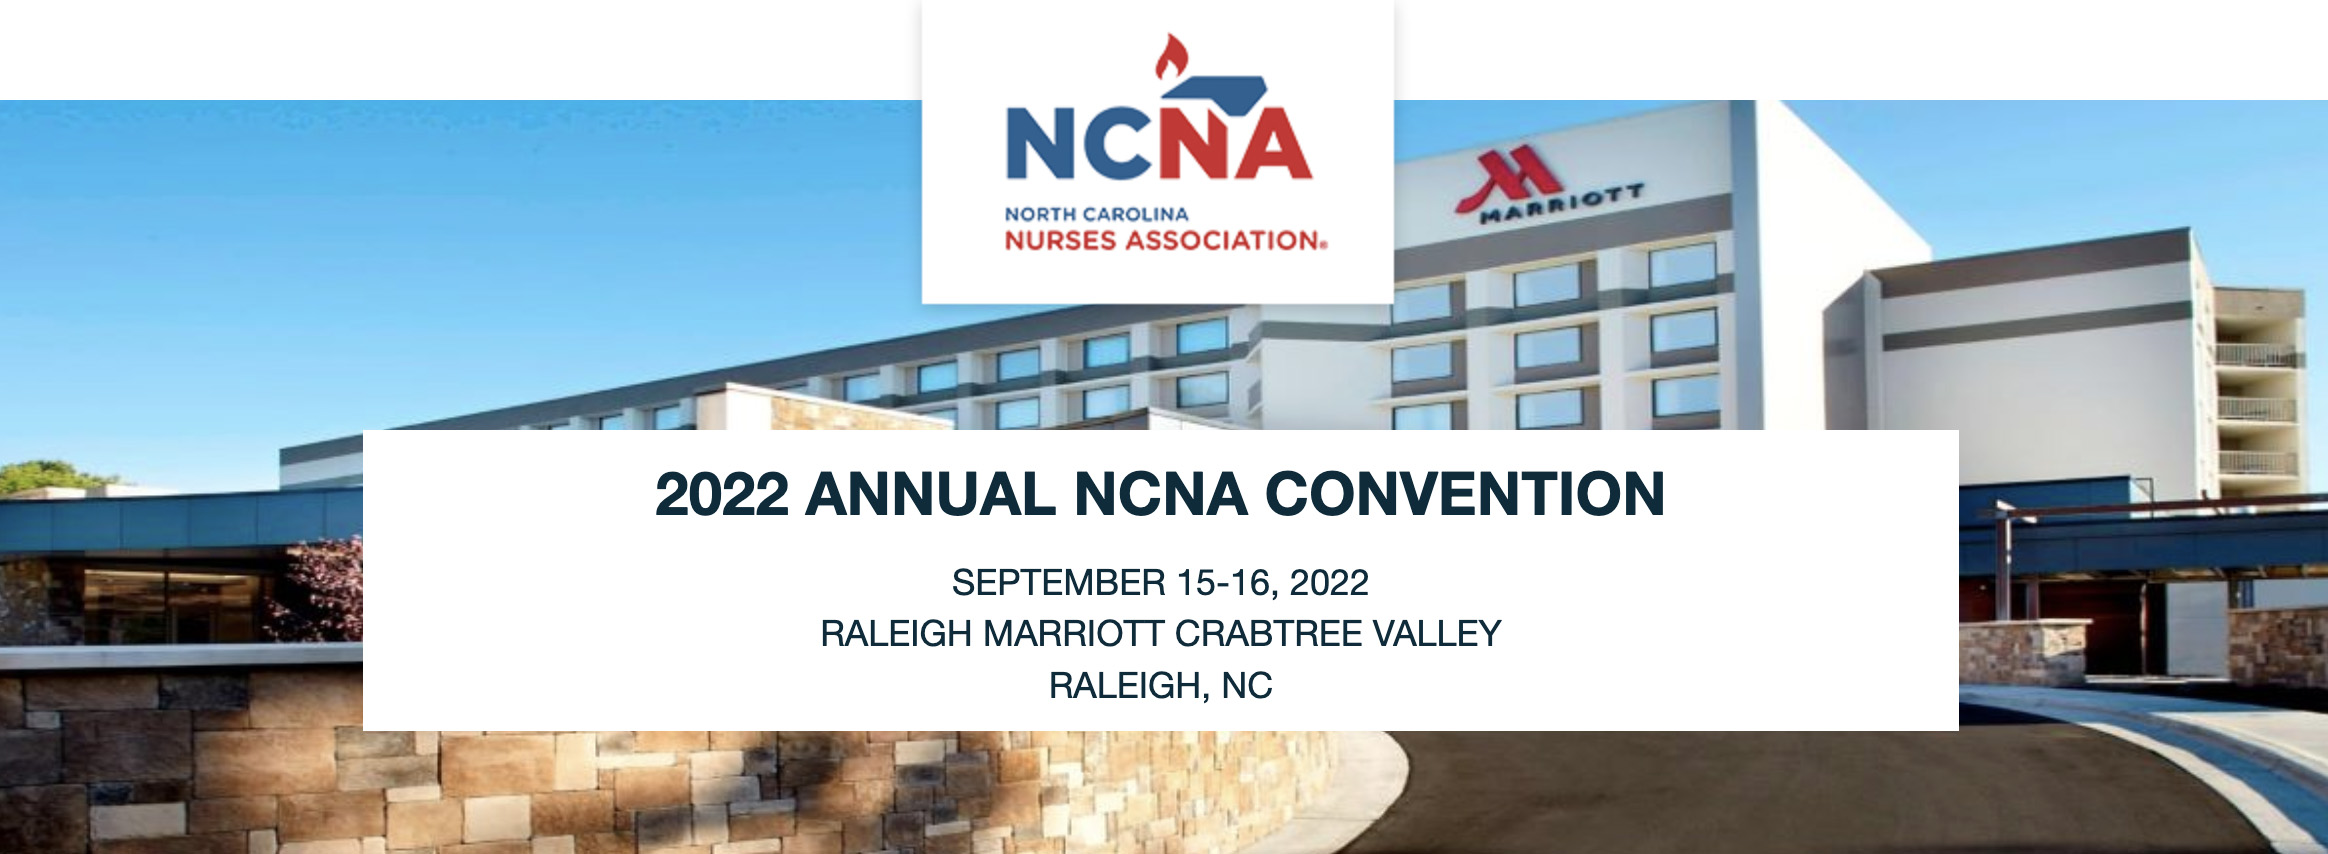 ncna-2022-annual-convention